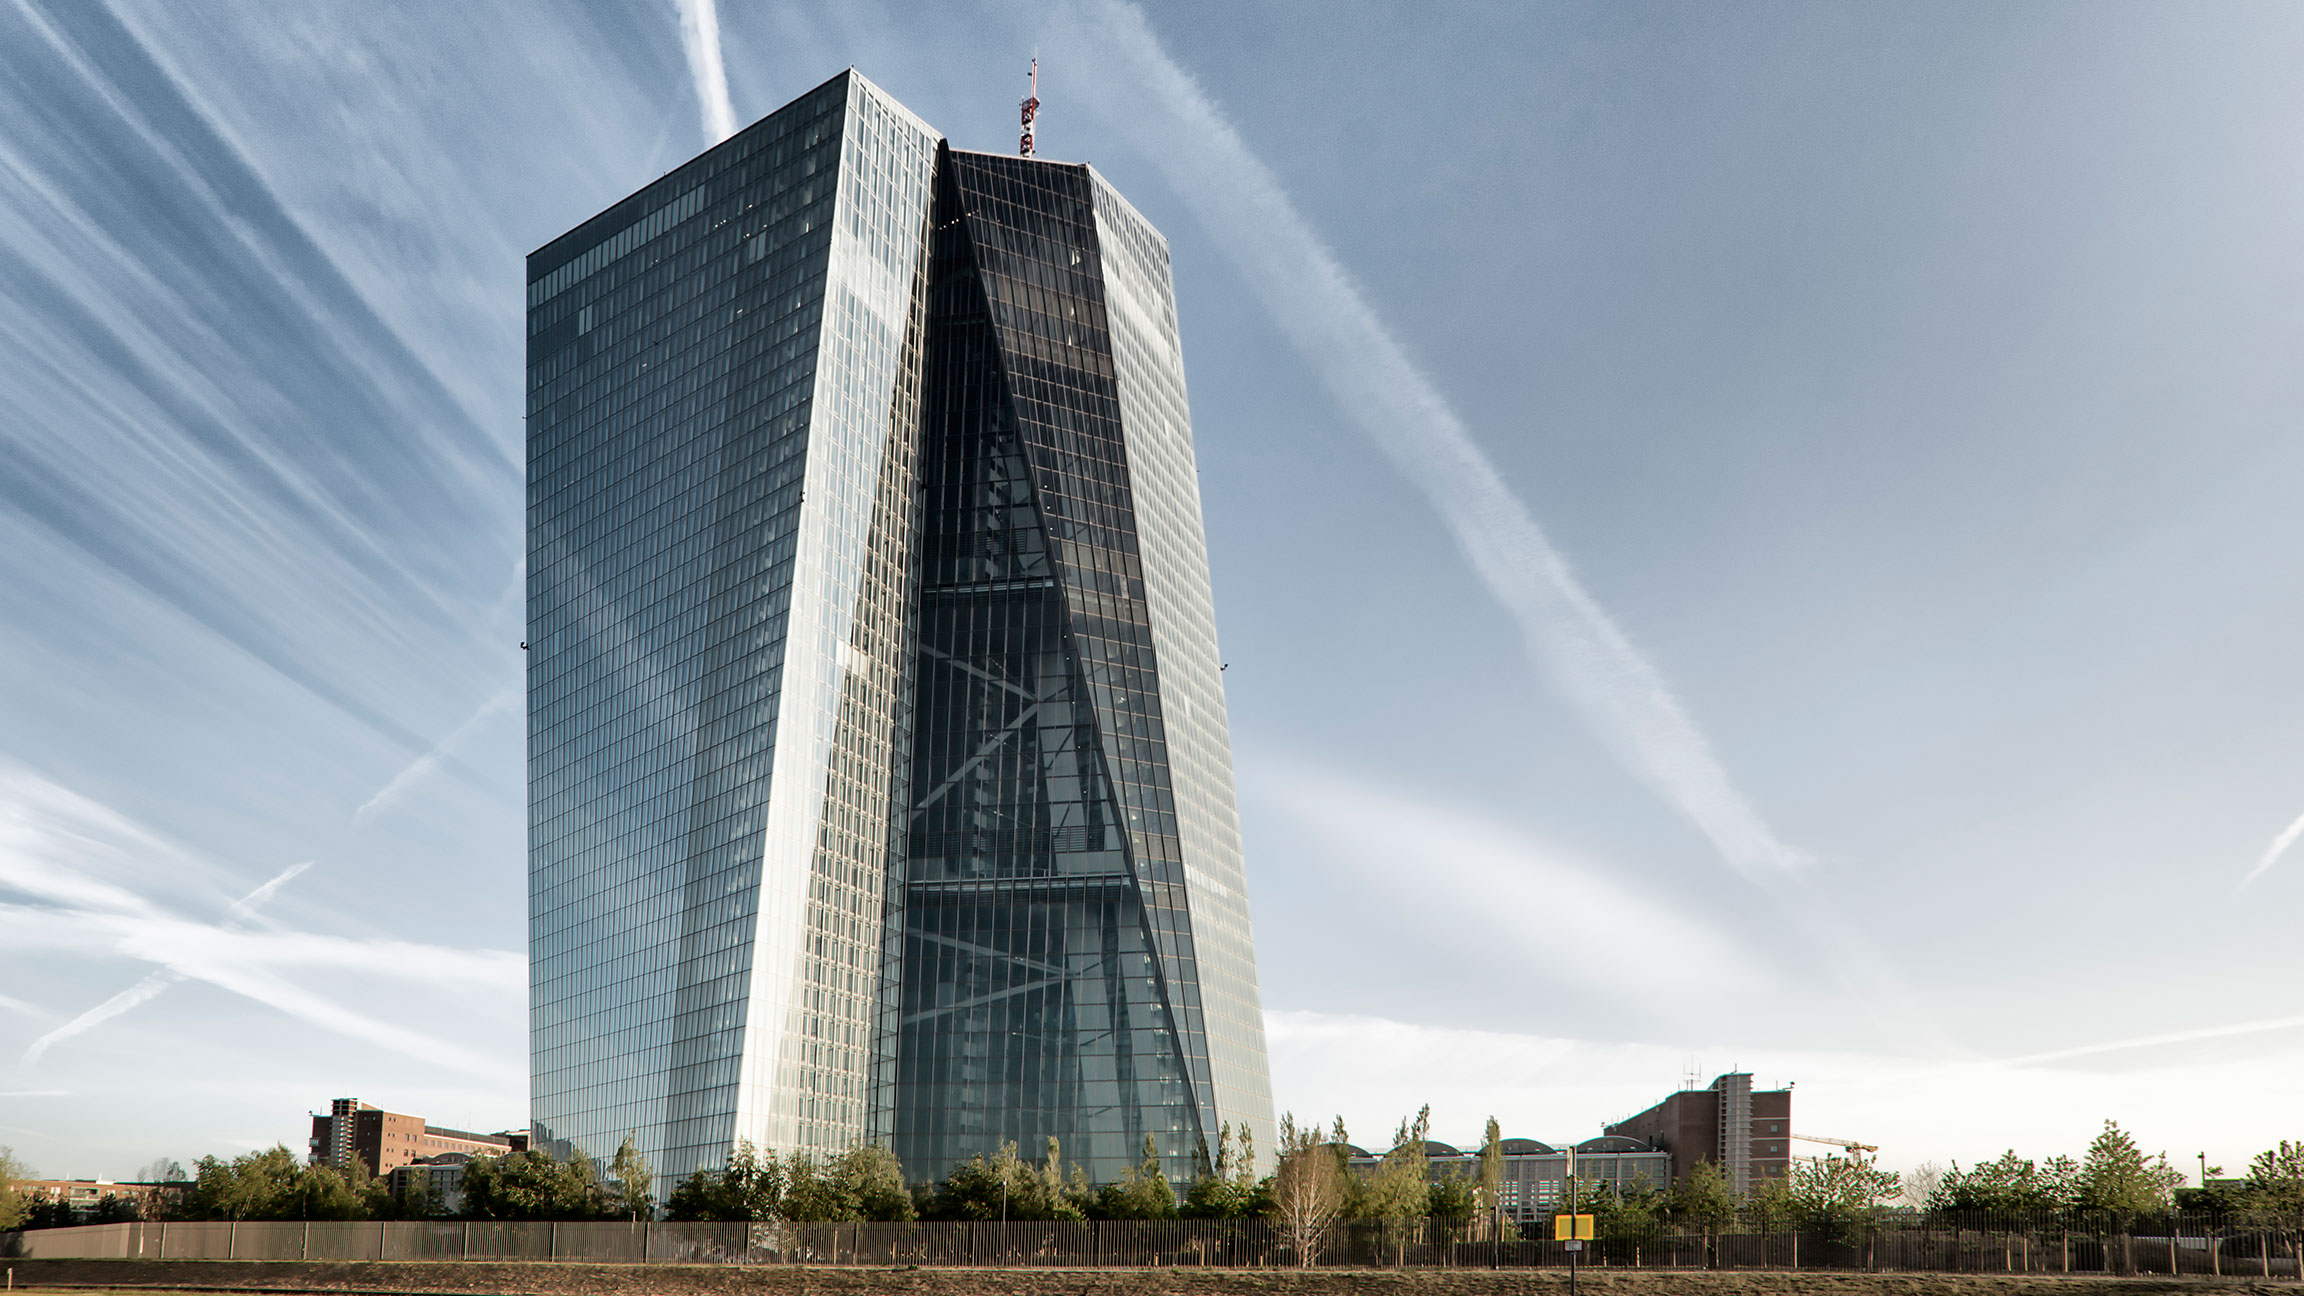 Given economic uncertainty, ECB may stay accommodative